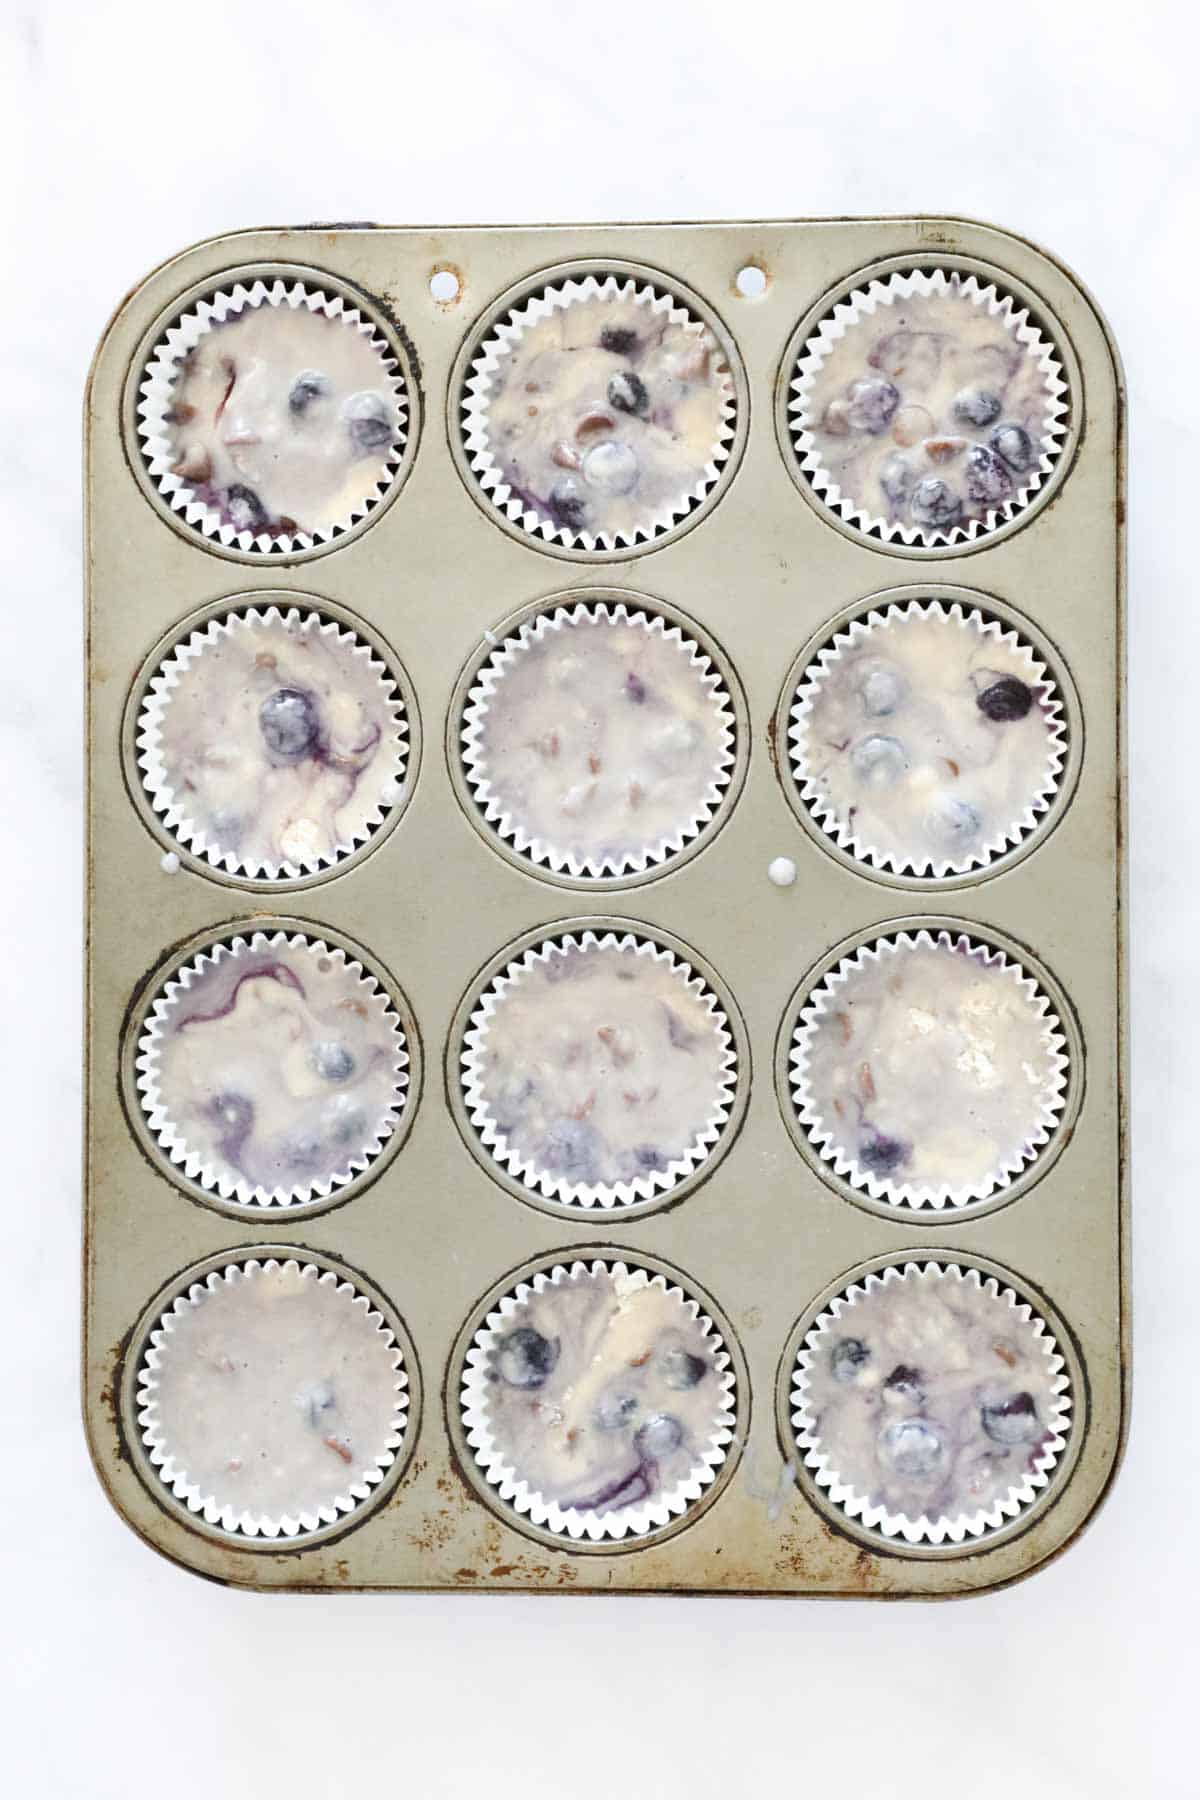 Muffin batter in cases a muffin tin.